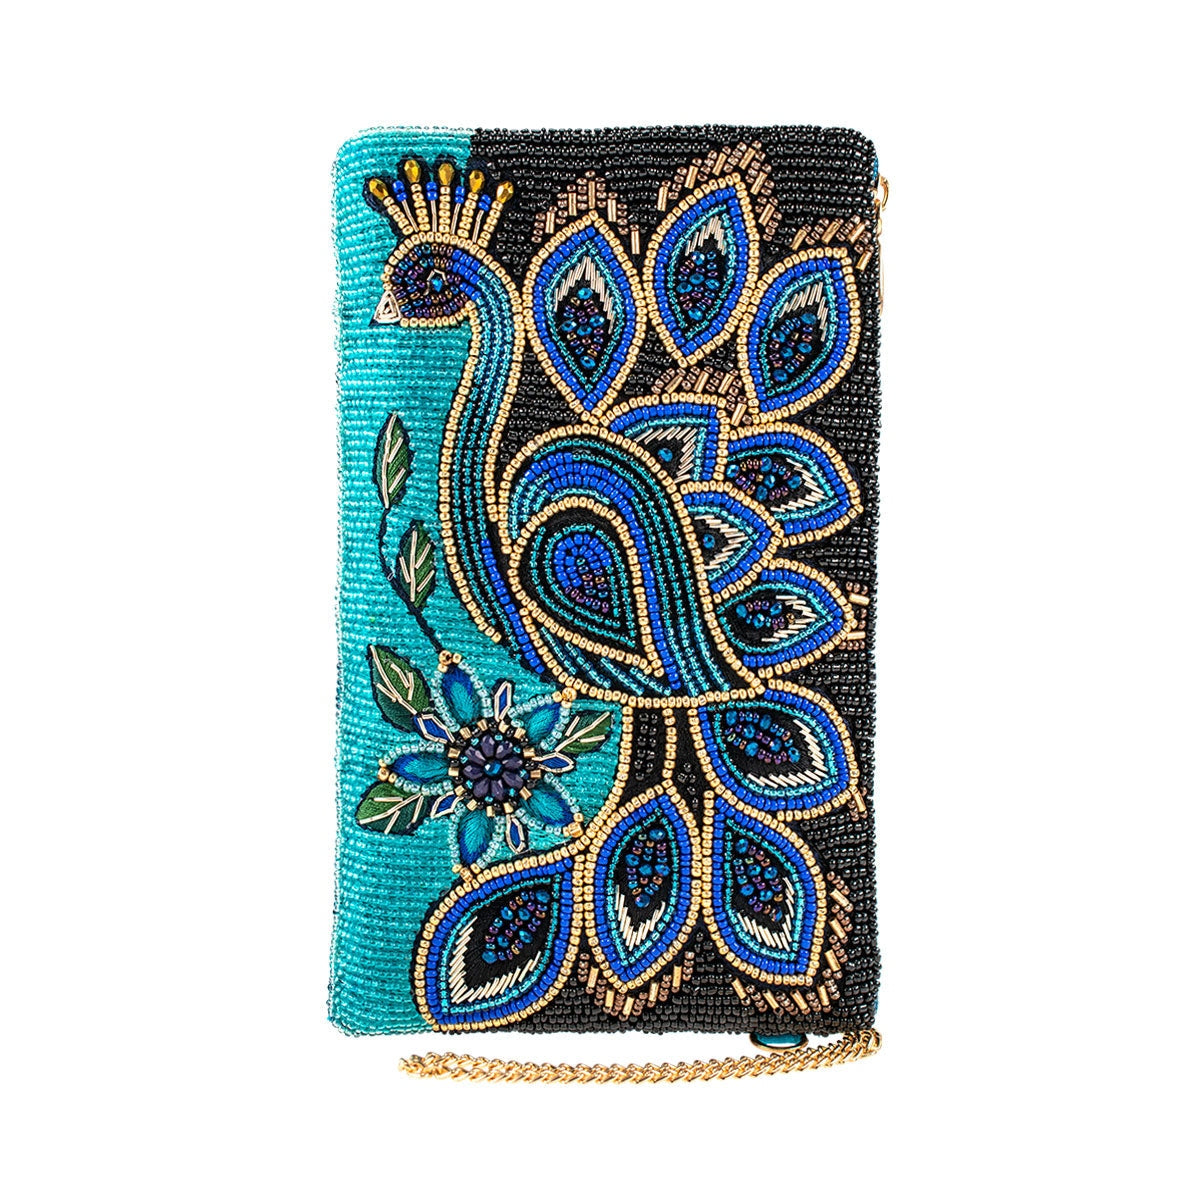 Peacock Evening Bag Sequins Beaded Clutch Purse with Ring Lock Closure for  Wedding Party Peacock Blue: Handbags: Amazon.com